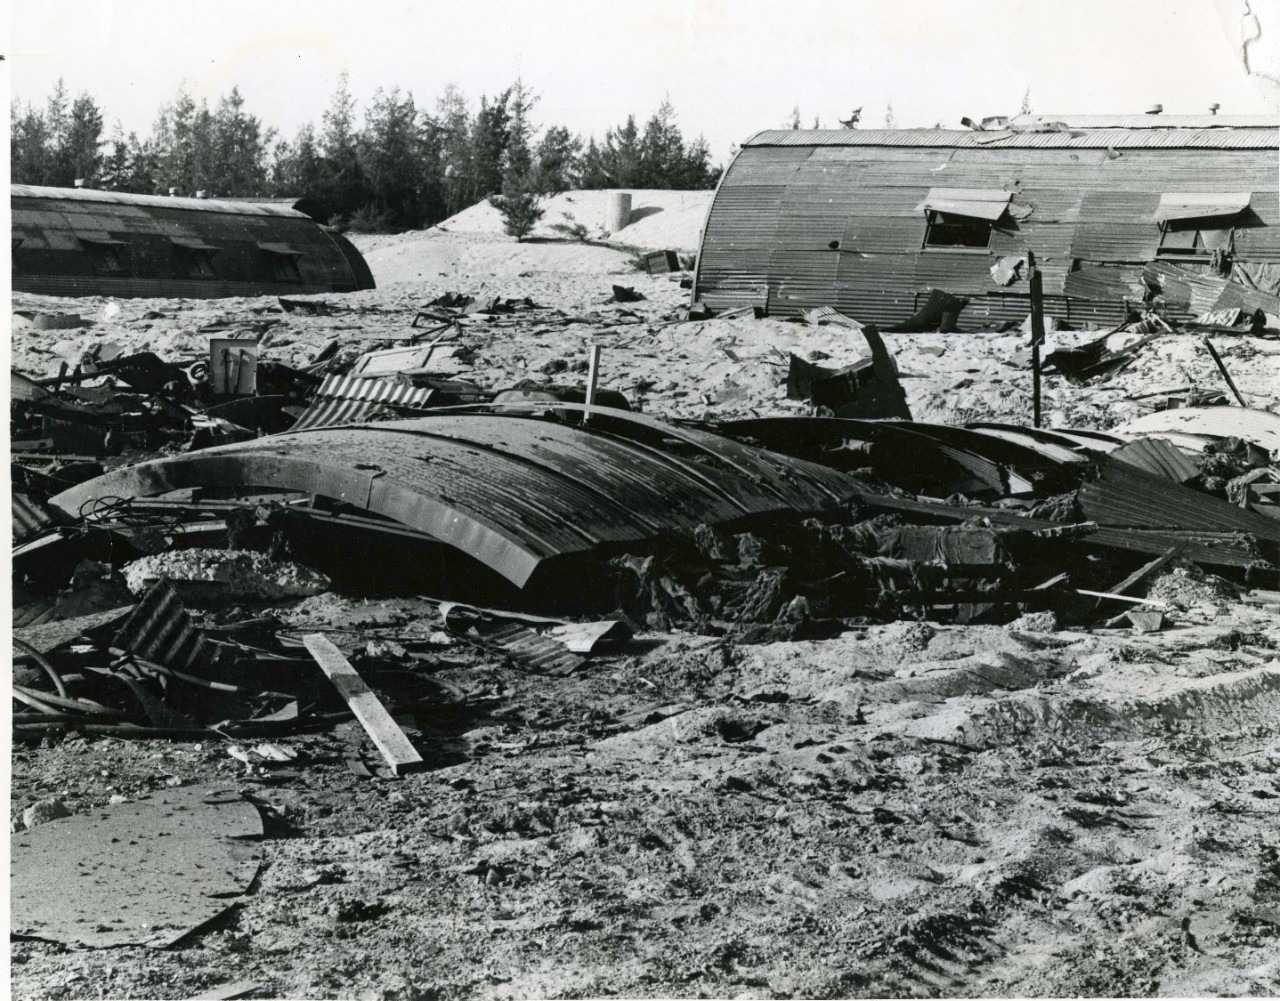 Destruction endured to Naval Quonset huts on Da Nang (Đà Nẵng), Vietnam after a Viet Cong San attack on 28 October, 1965. The area was later called Camp Adenir after the death of SD3 Restituto P. Adenir.